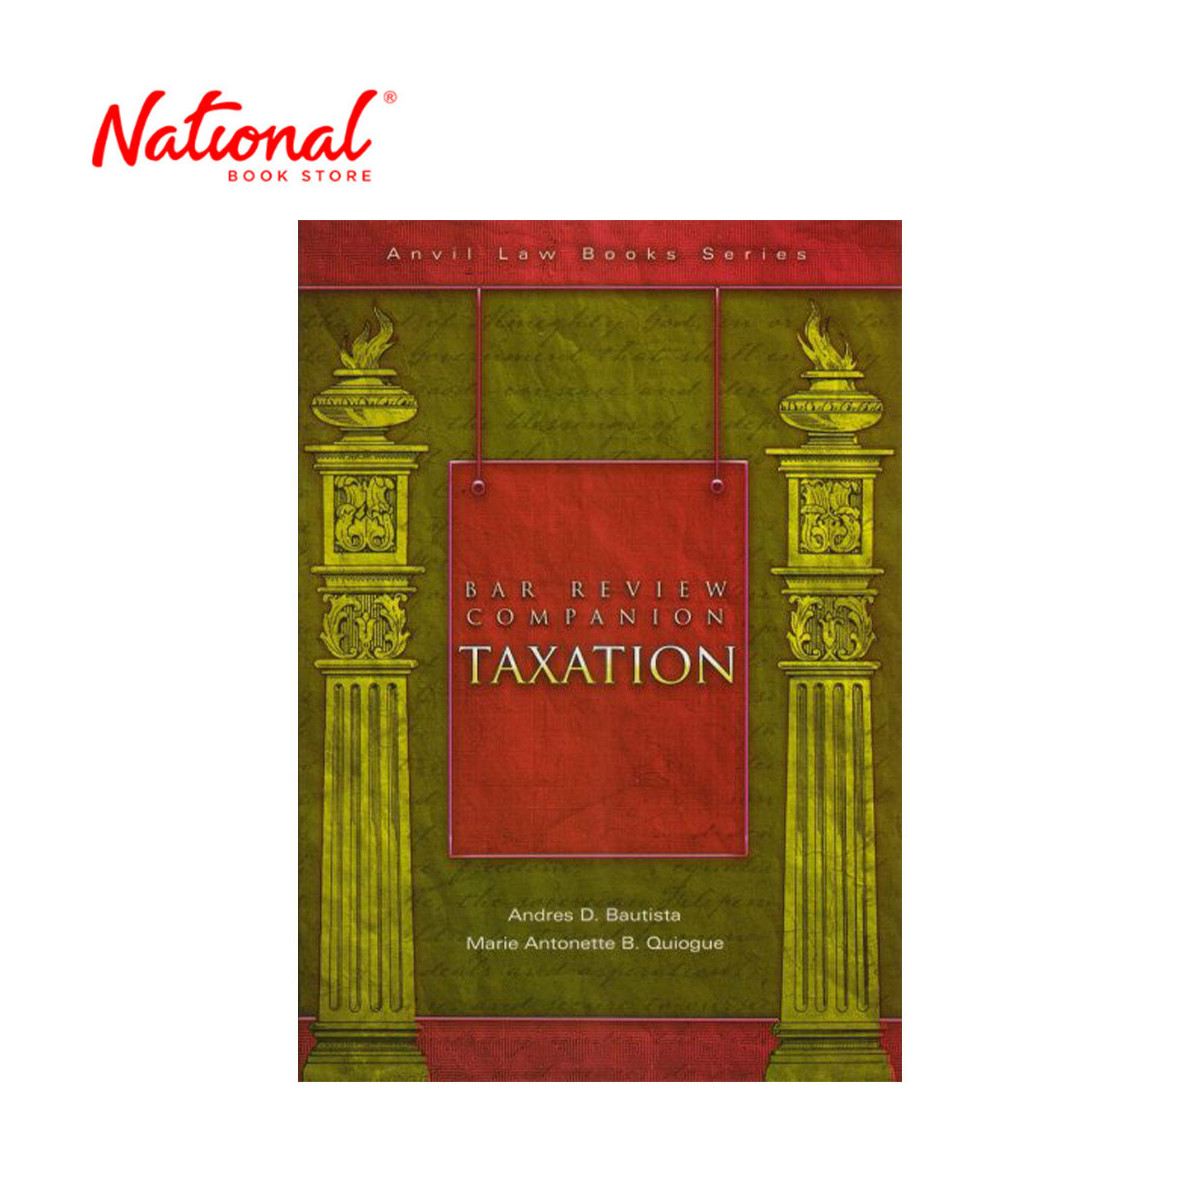 Bar Review Companion: Taxation by Andres D. Bautista & Marie Antonette Quiogue - Trade Paperback